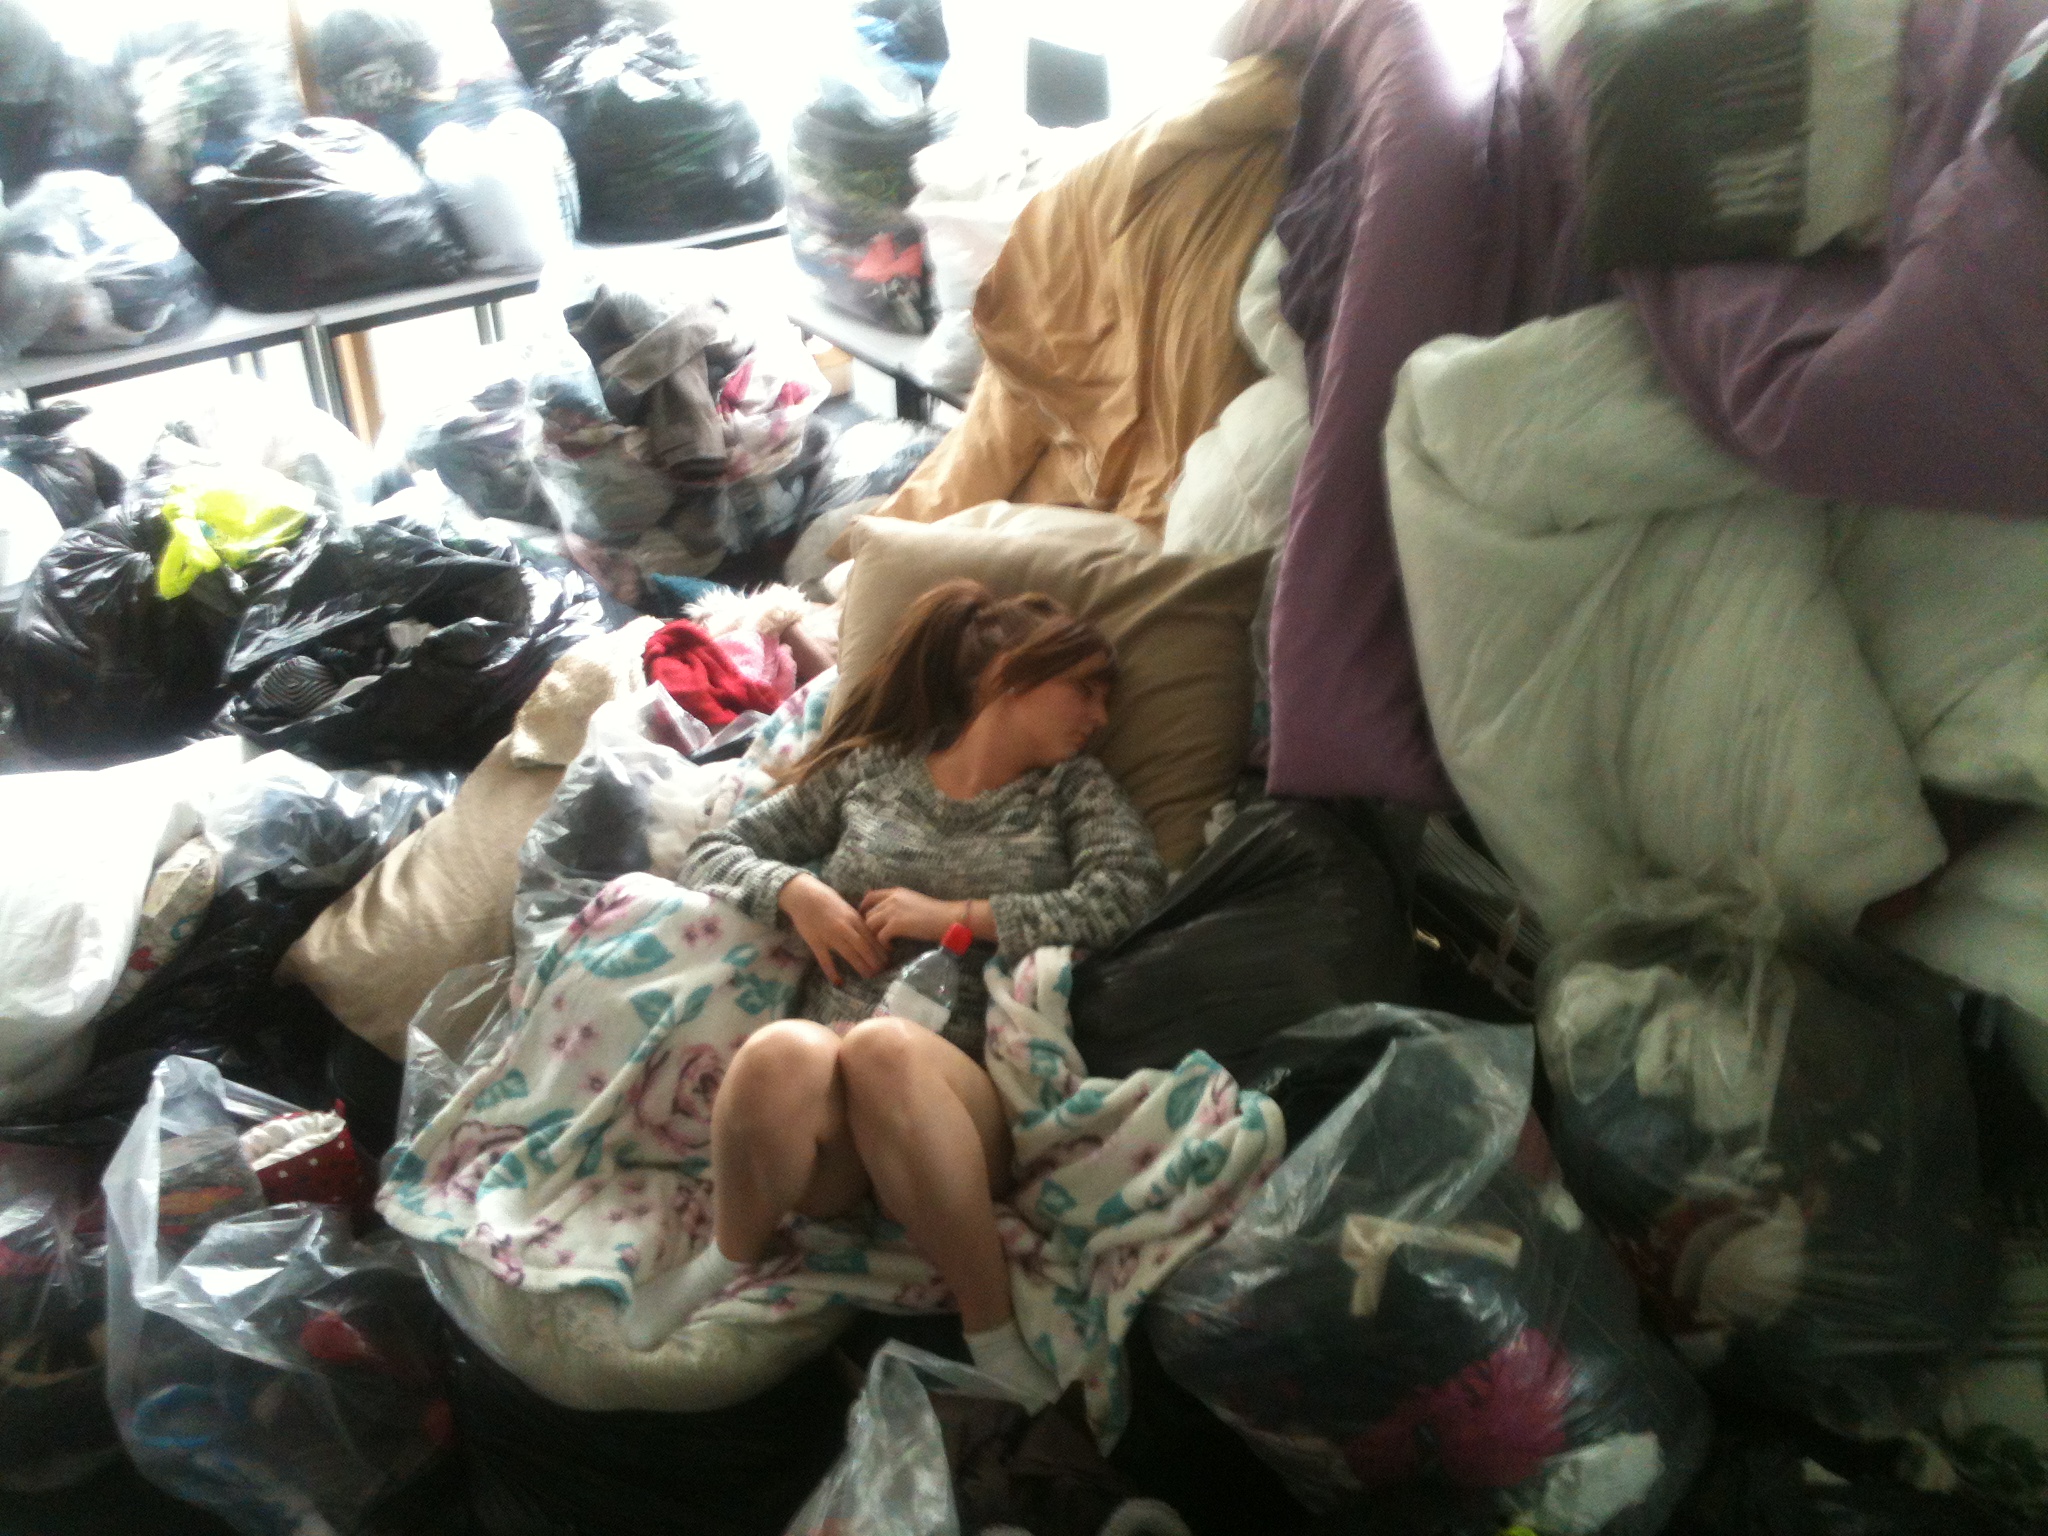 Finding a comfy place to nap after all the hard work of sorting! Project 2013